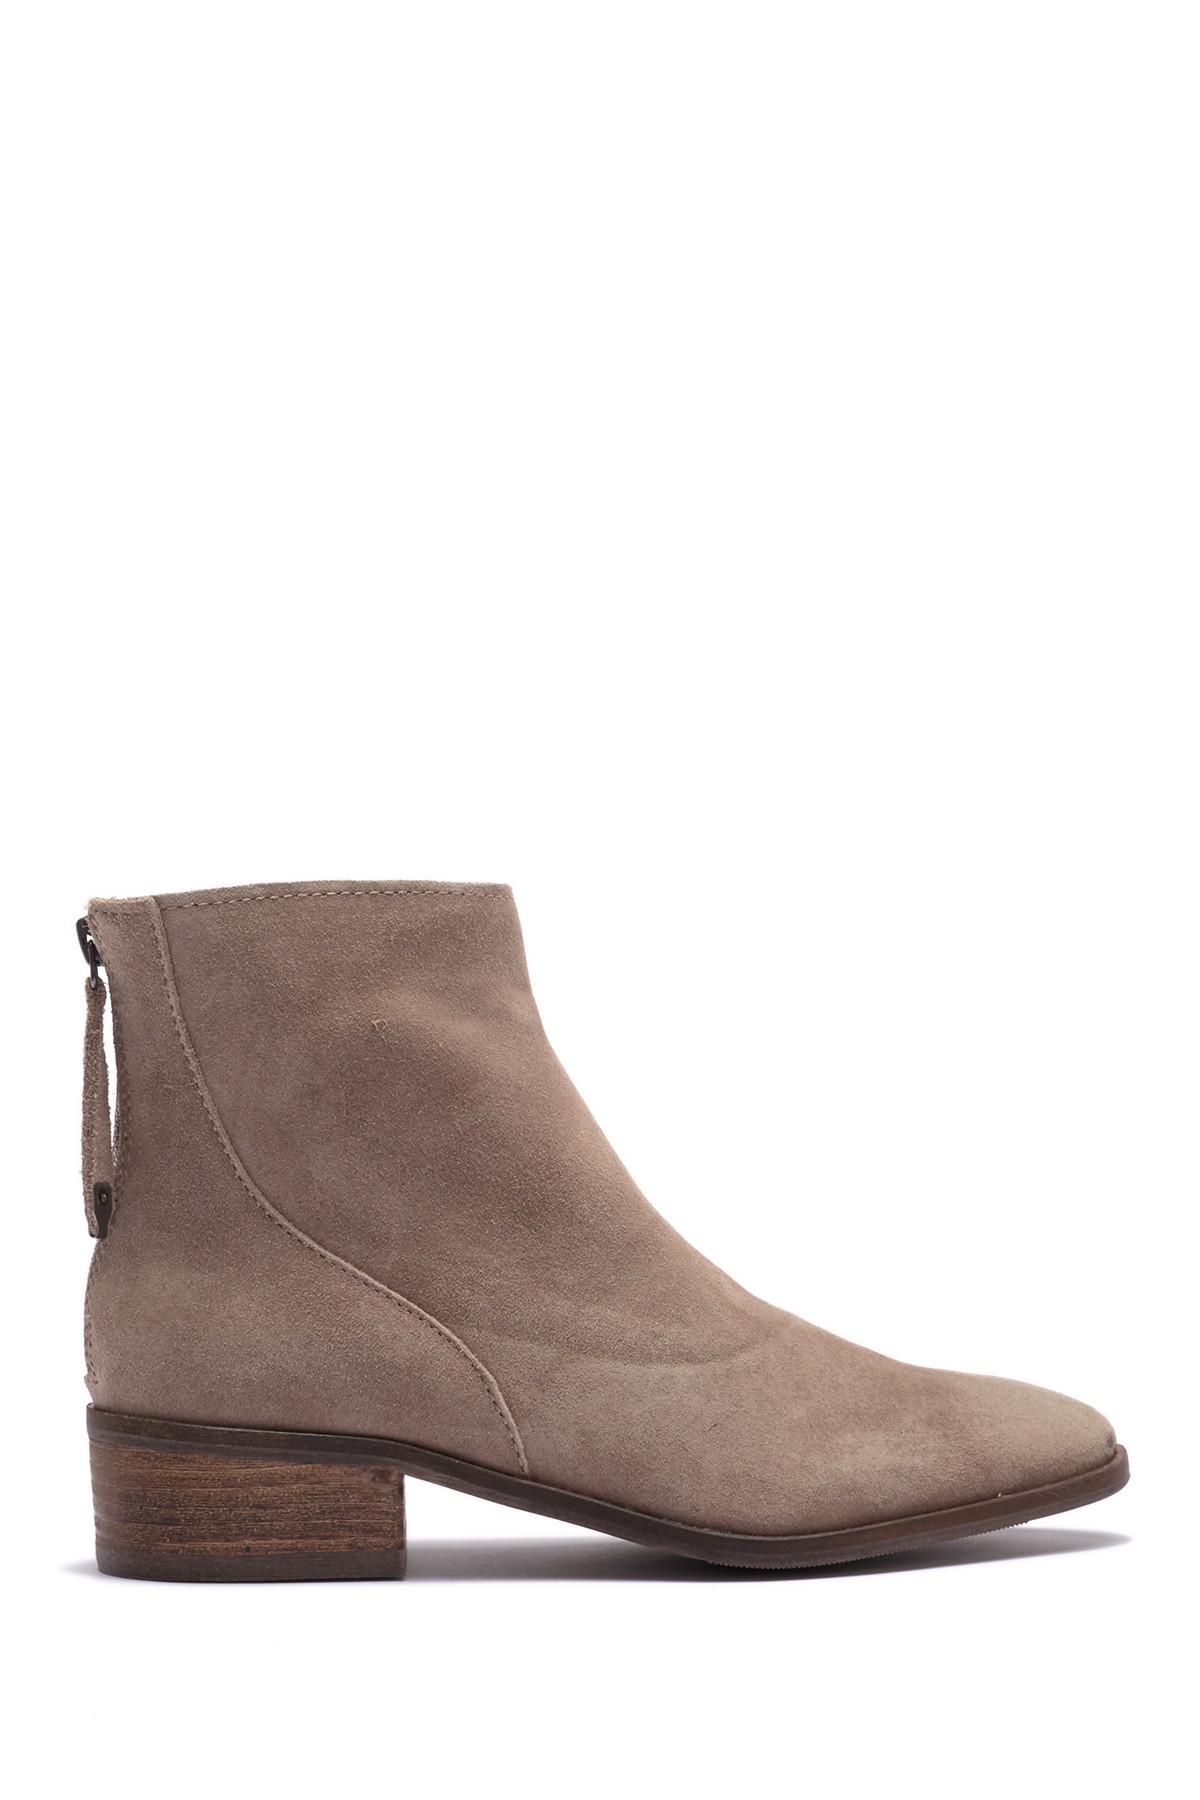 Dolce Vita Tassy Suede Ankle Boot in dk 